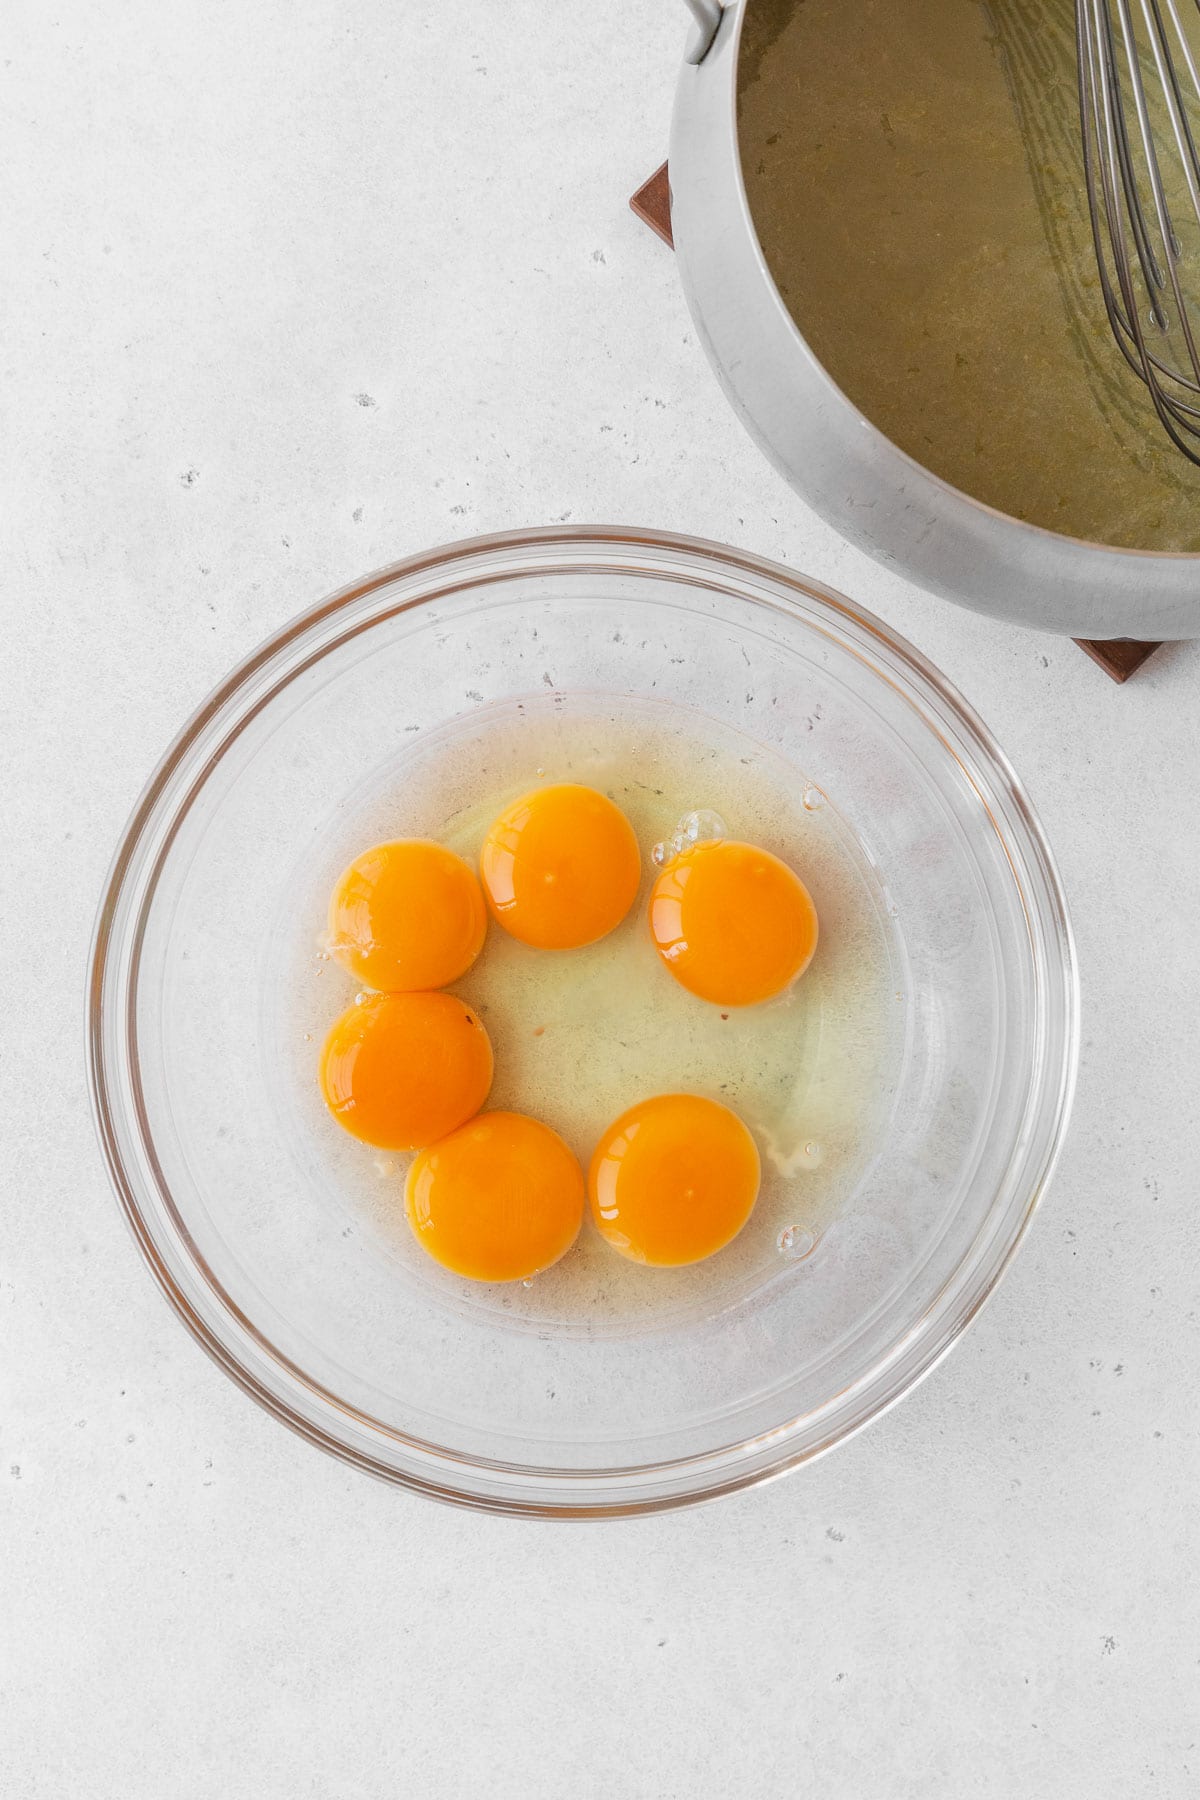 6 egg yolks in a glass mixing bowl on the counter.